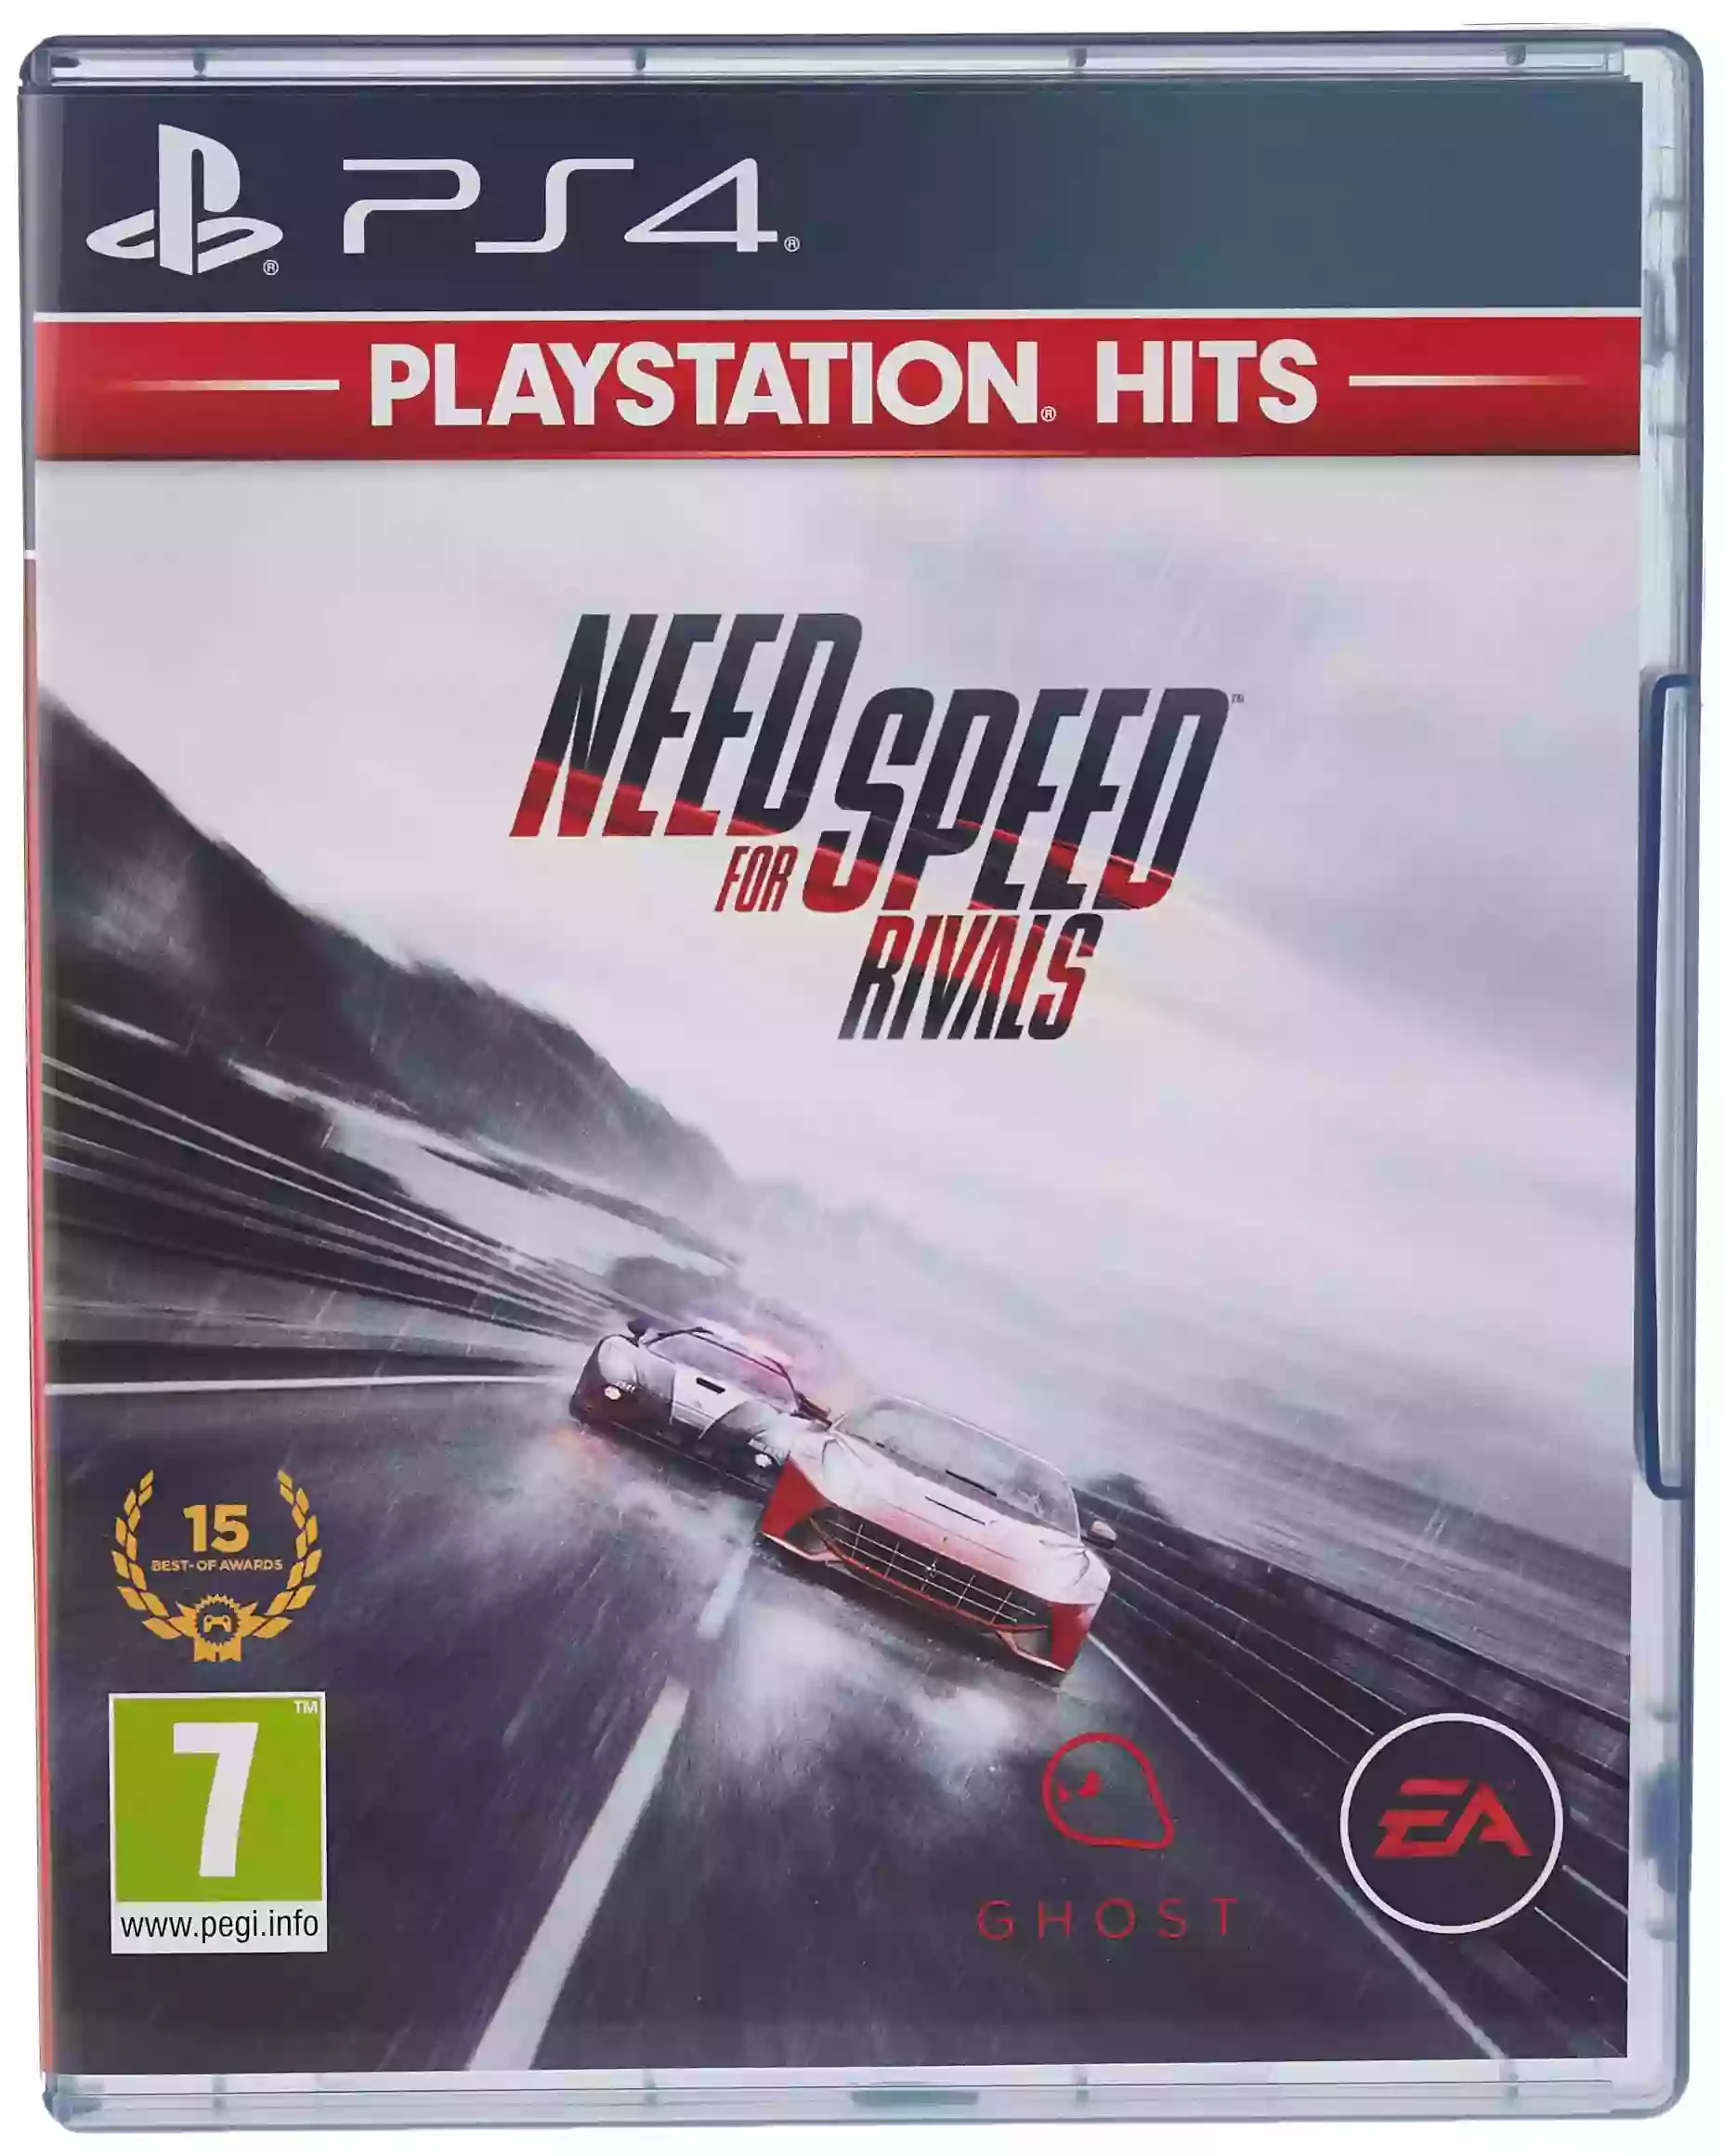 NEED FOR SPEED { NFS RIVALS } PS4 GAME